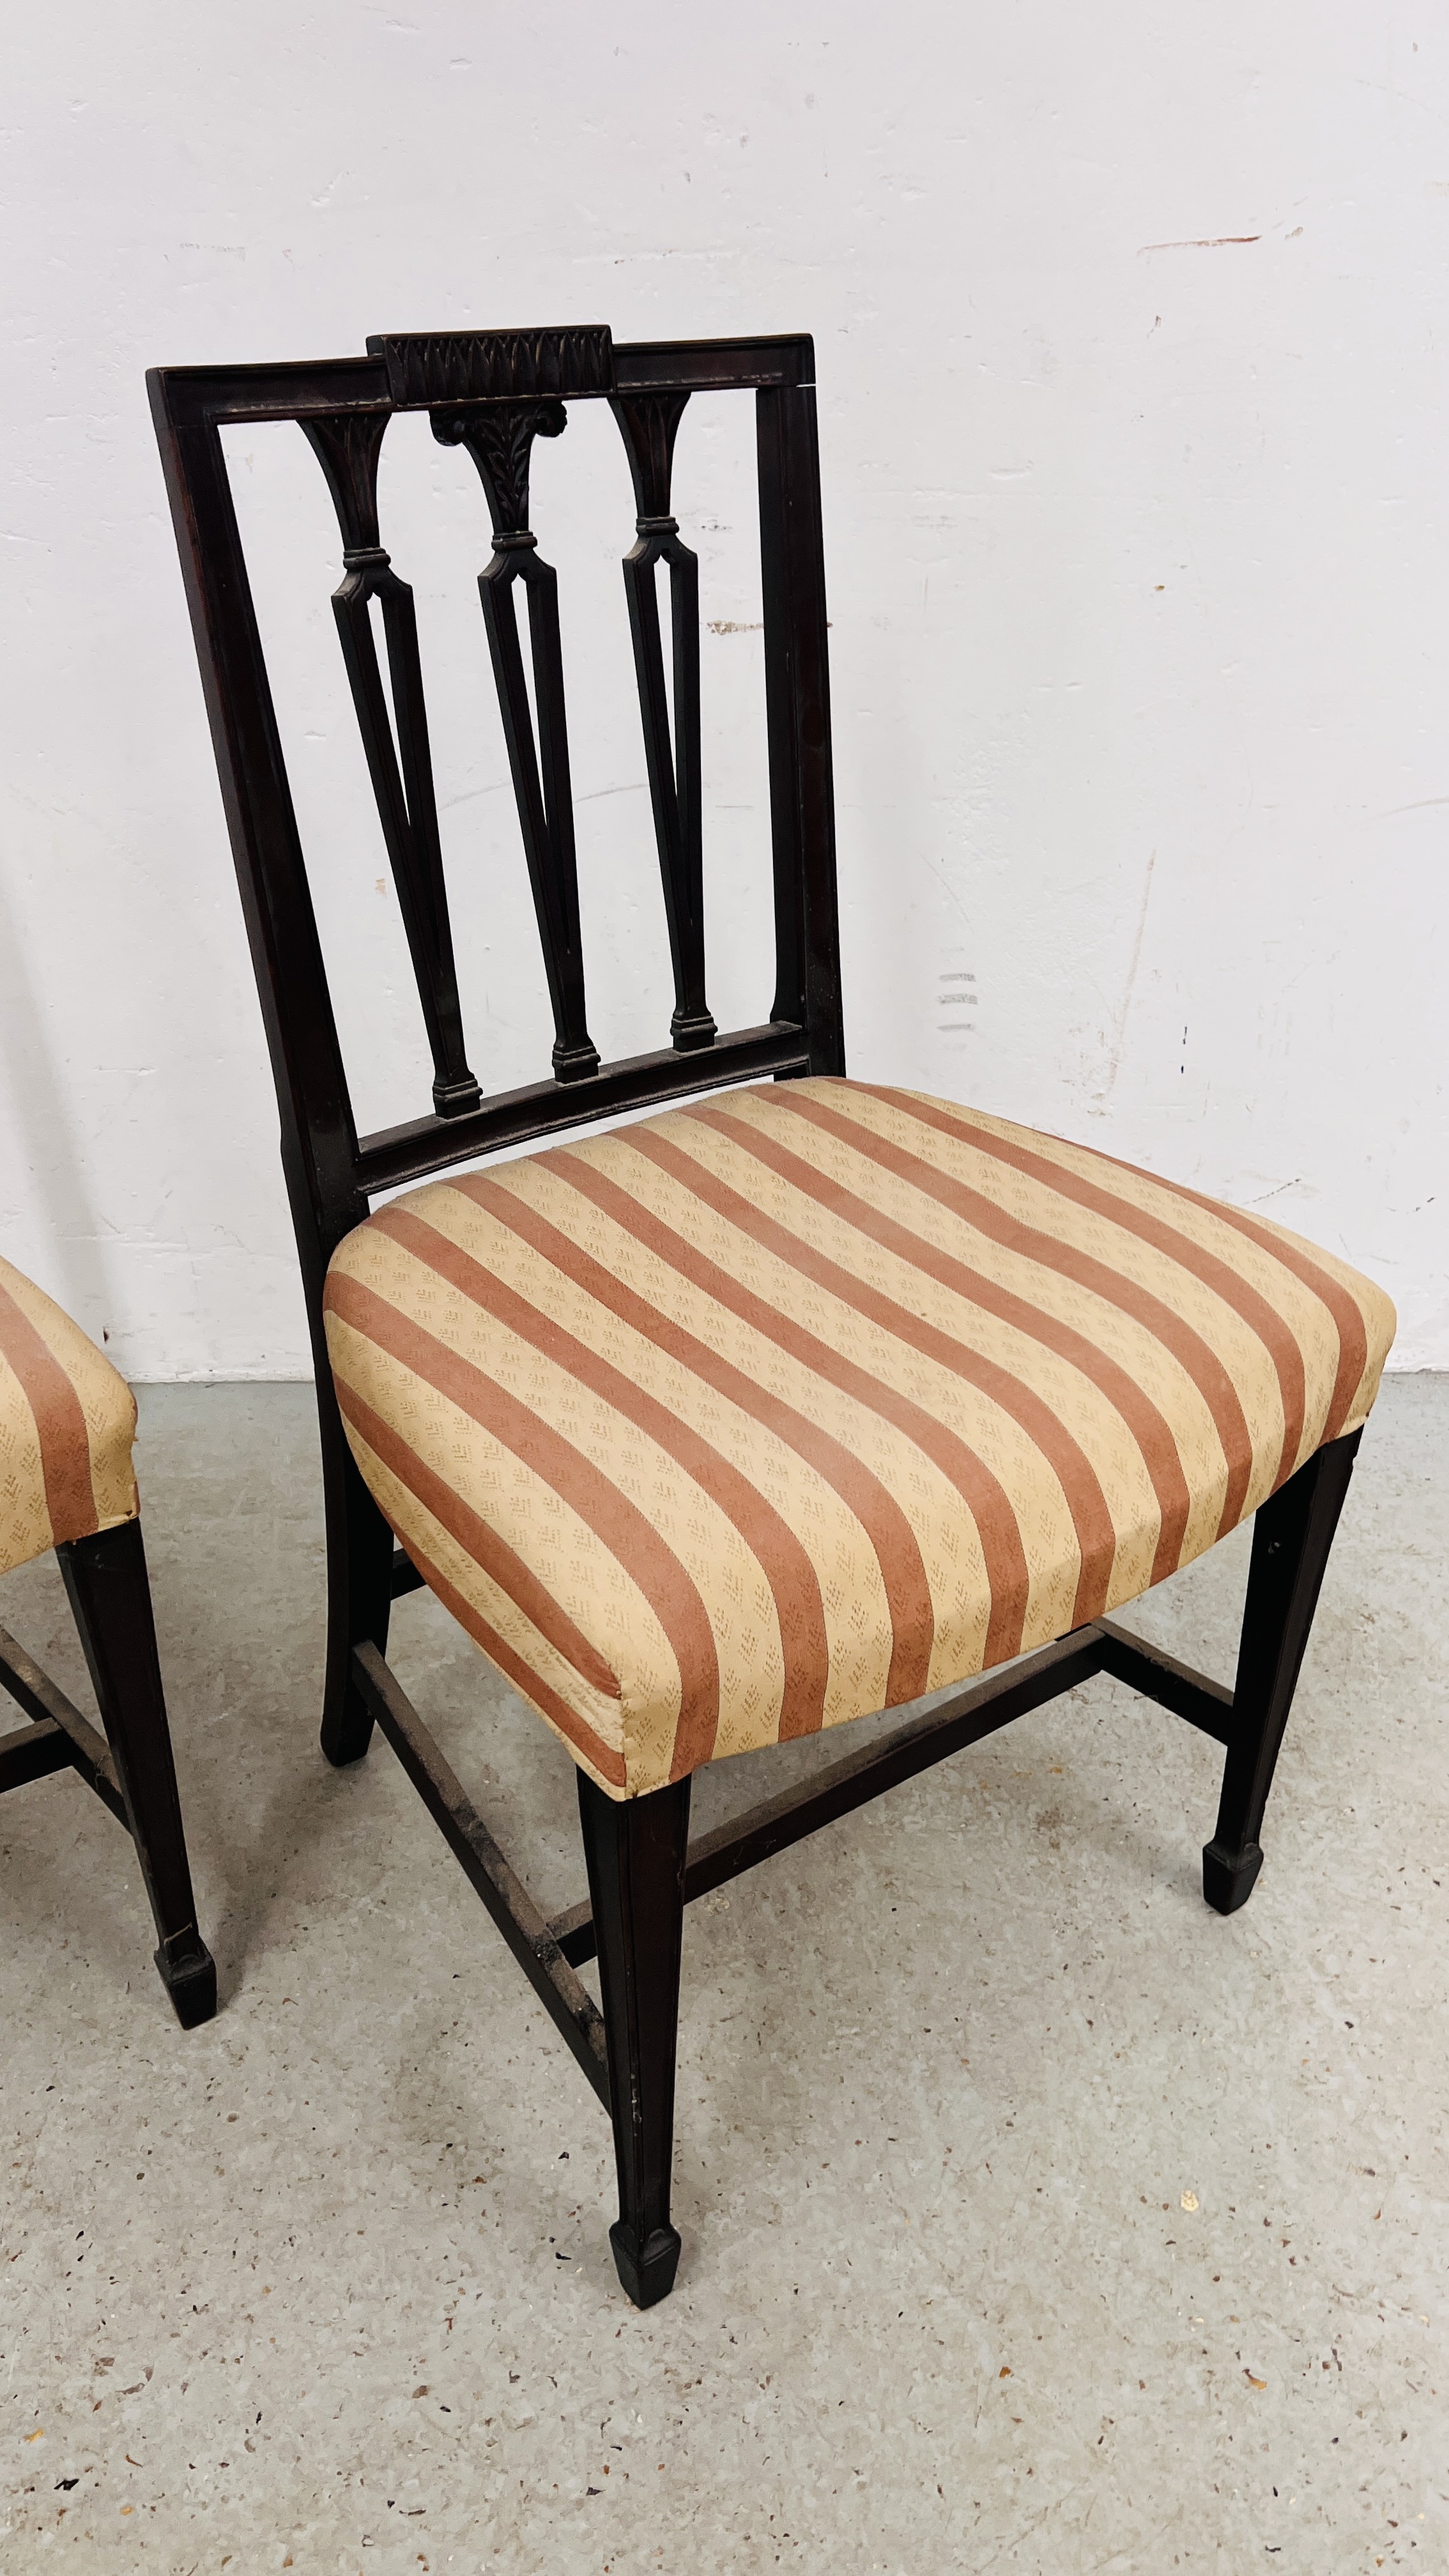 A PAIR OF GEORGE III MAHOGANY DINING CHAIRS IN HEPPLEWHITE STYLE (PINK STRIPED SEATS) - Image 2 of 13